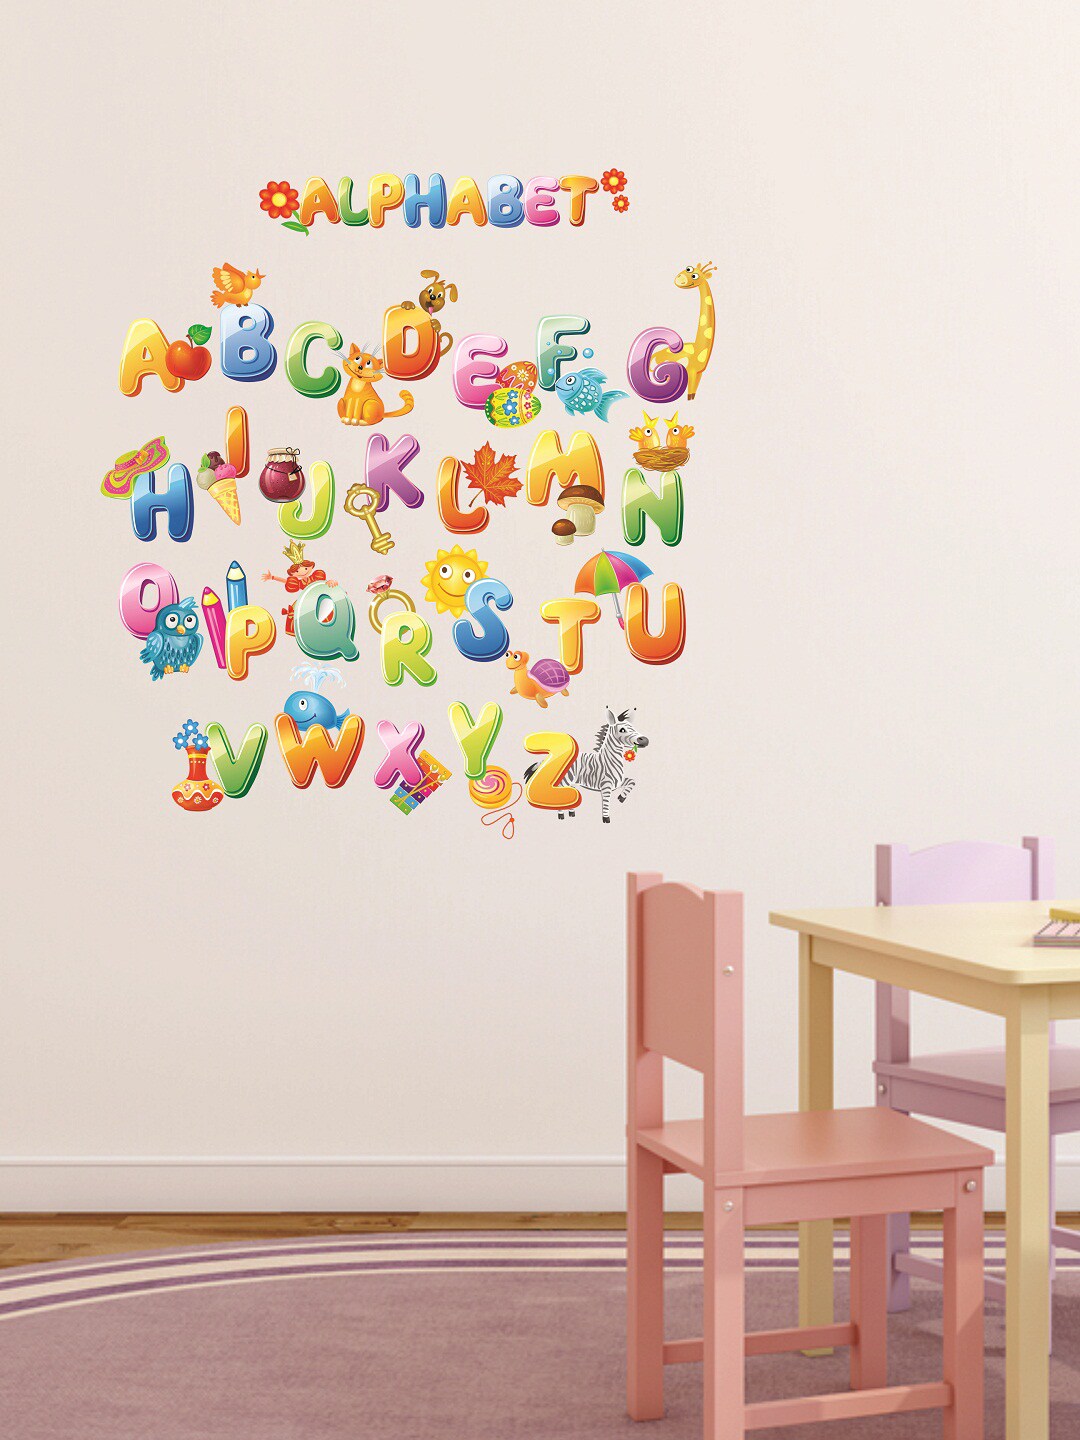 WALLSTICK Multicolored Alphabets Large Vinyl Wall Sticker Price in India